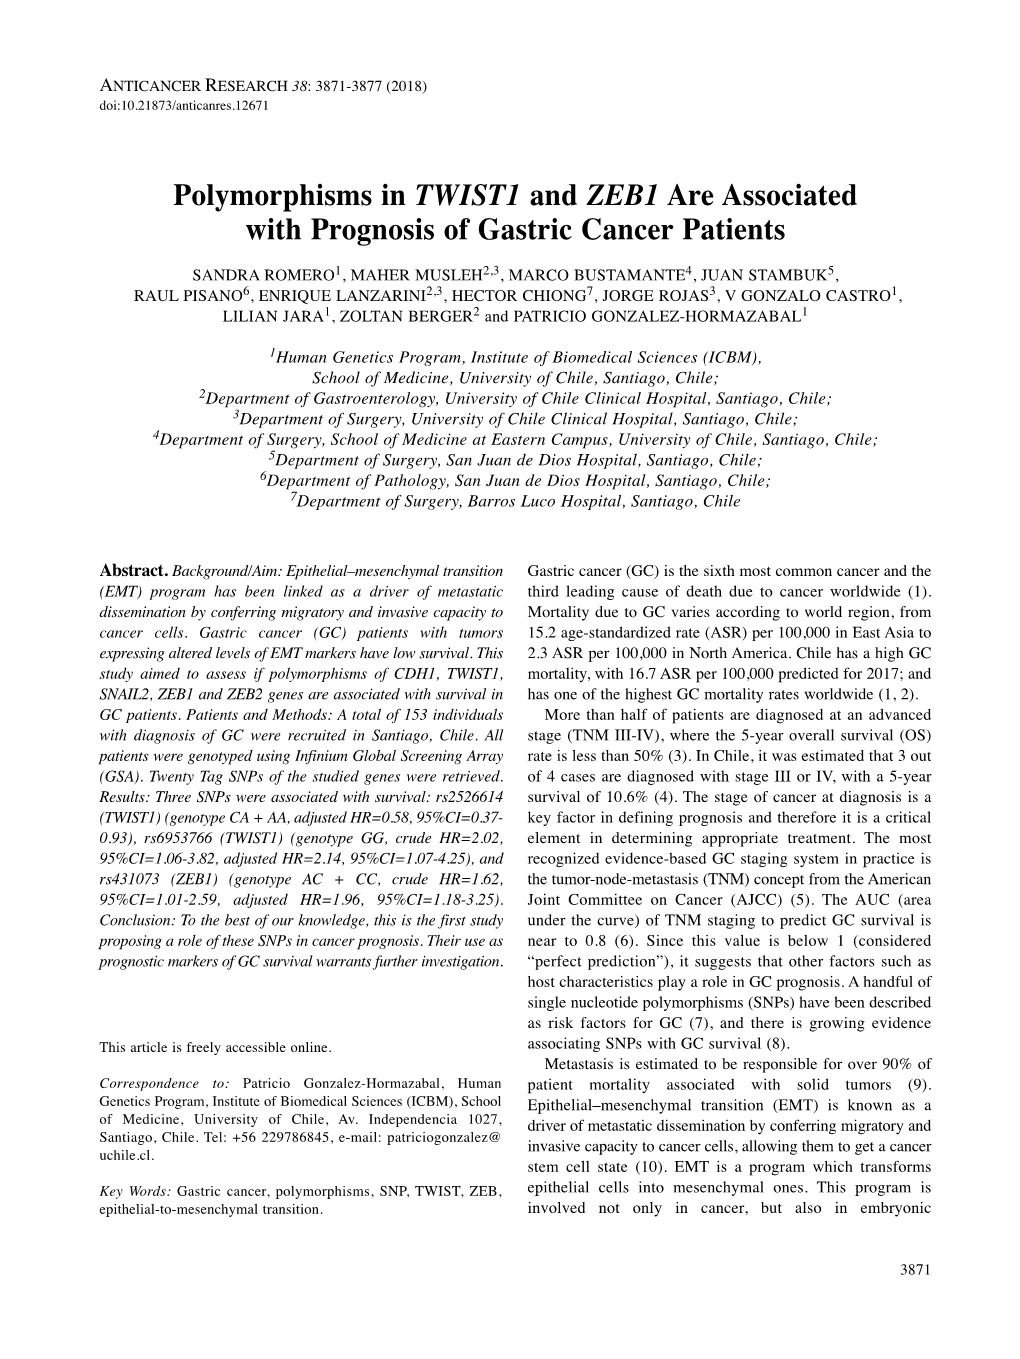 Polymorphisms in TWIST1 and ZEB1 Are Associated with Prognosis Of